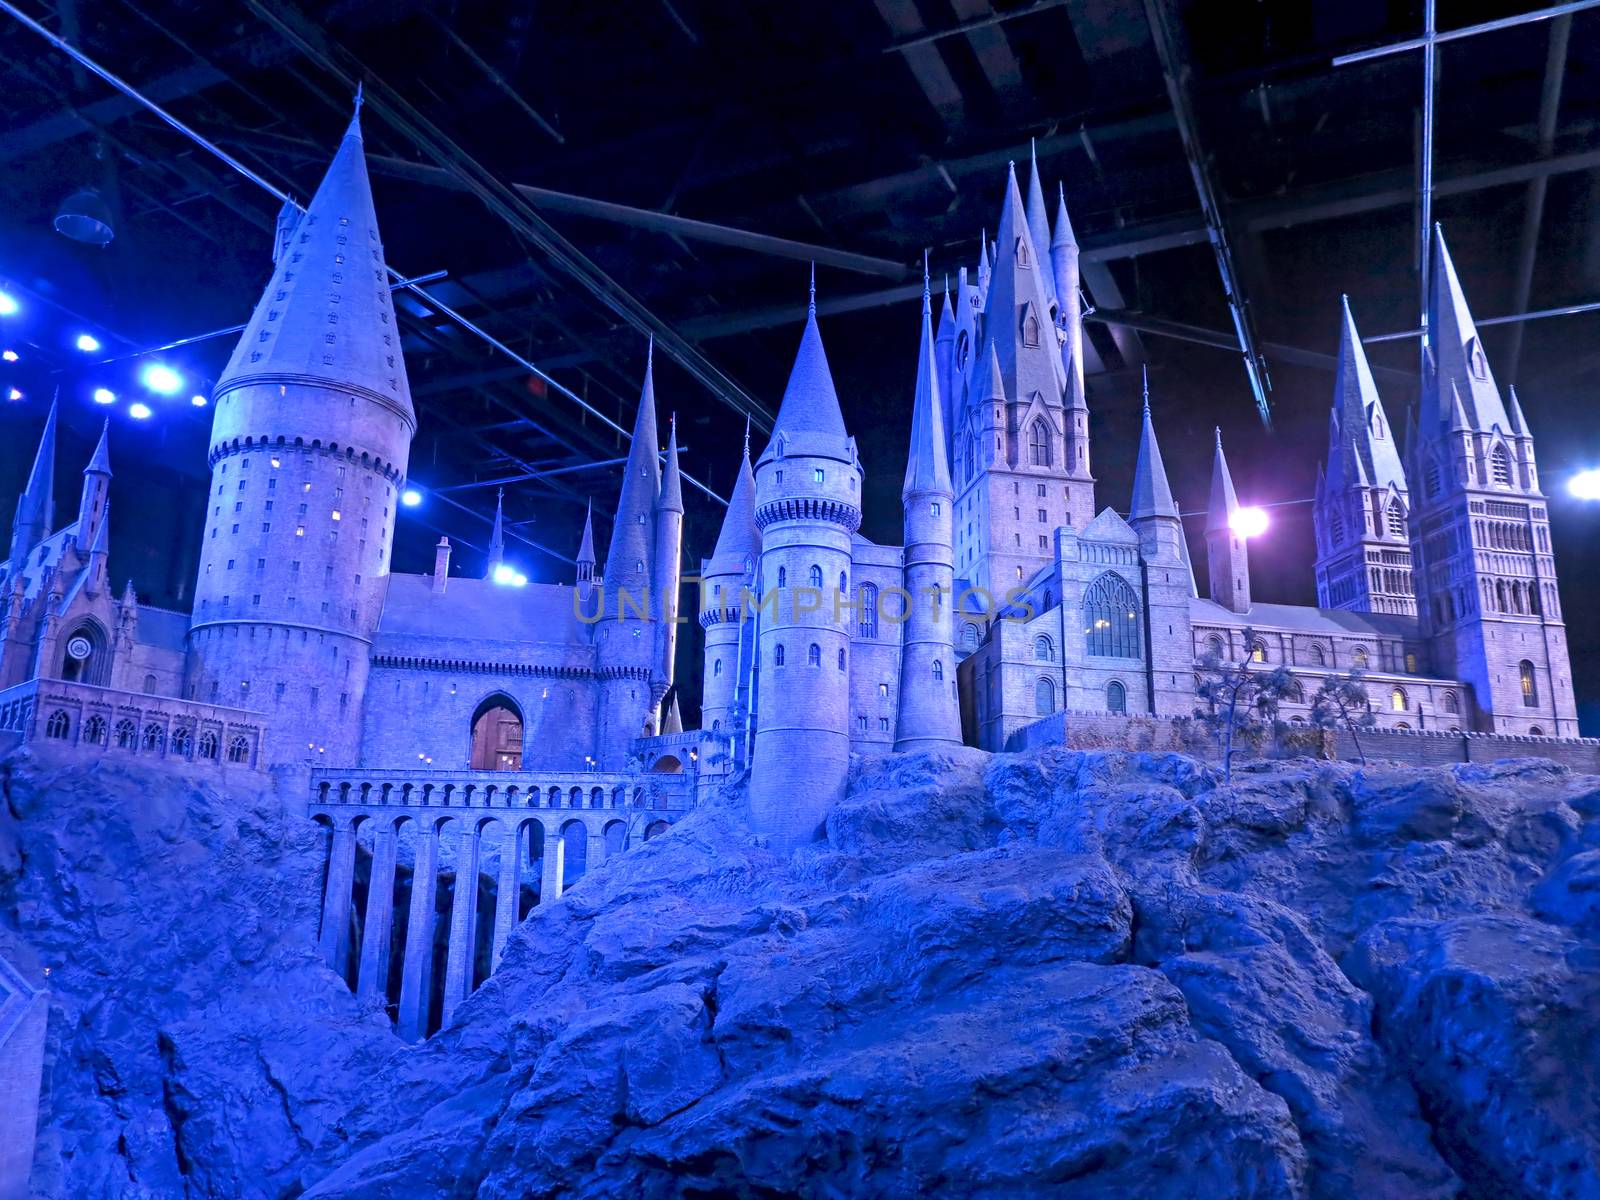 LONDON, ENGLAND - July 30, 2012 - A scale model of Hogwarts at The Warner Bros. Studio Tour - Making of Harry Potter.